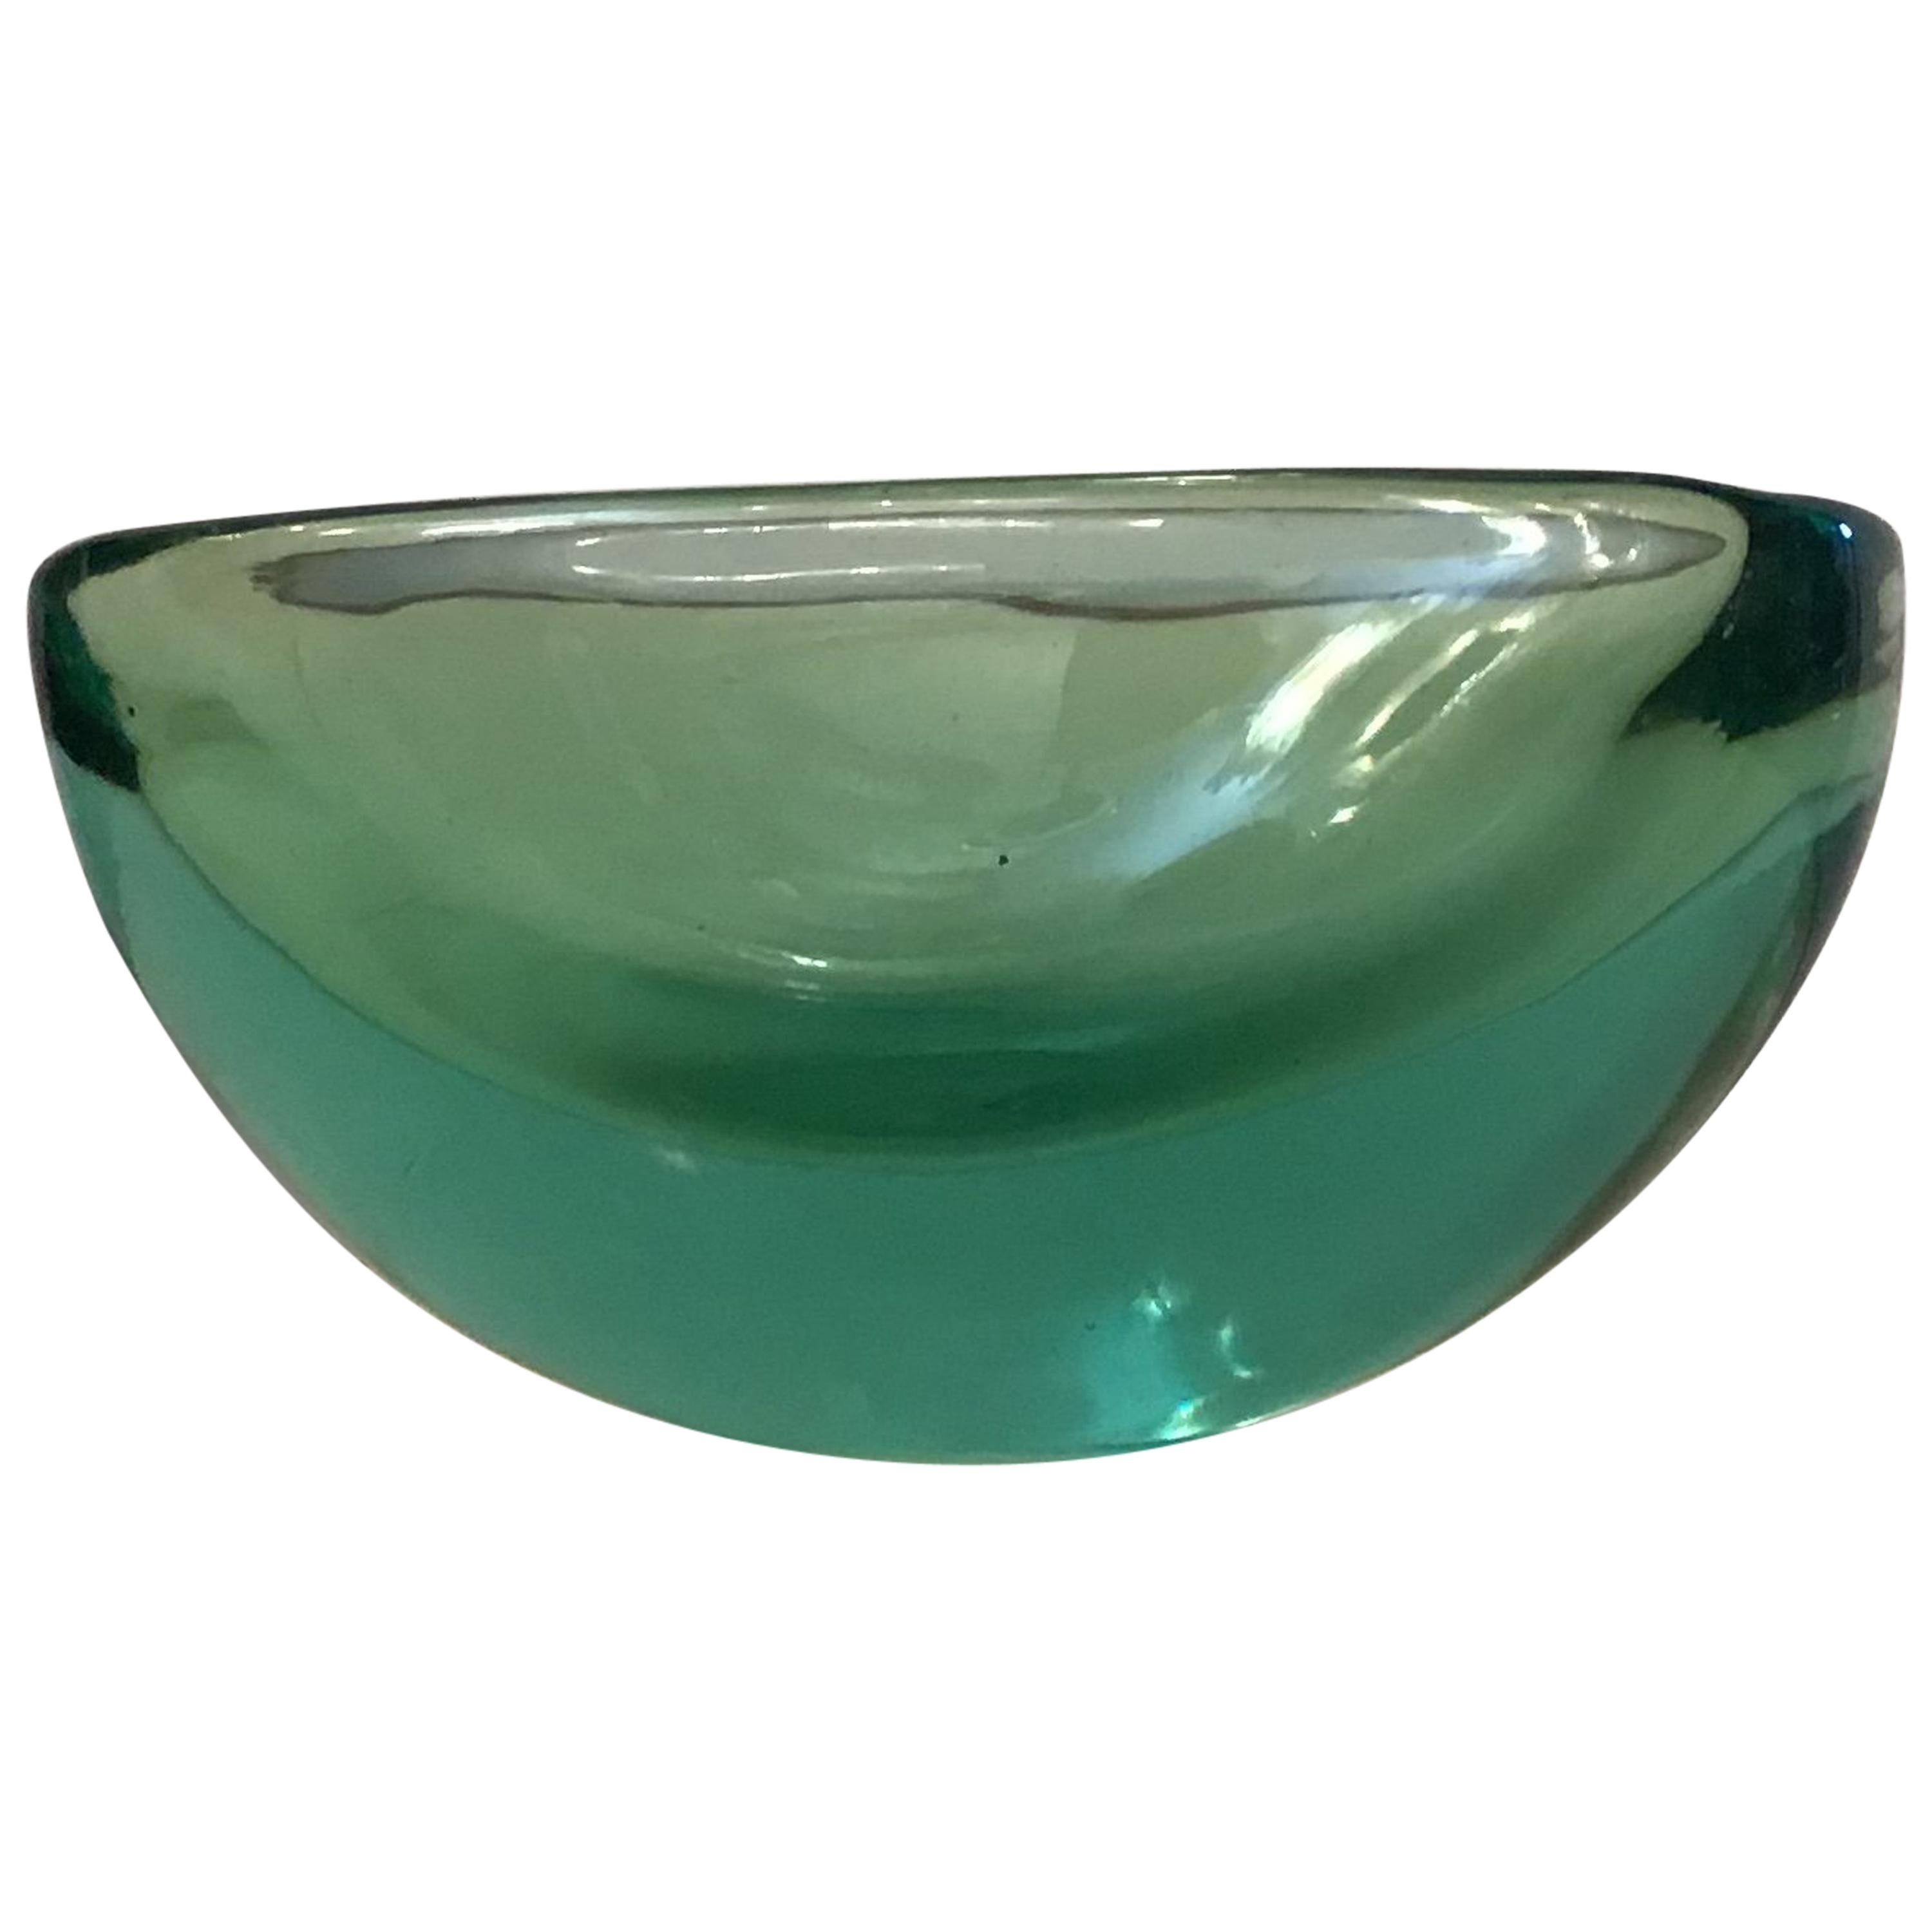 Archimede Seguso Oval Bowl, Green Submerged Glass Centrepiece, 1950 For Sale